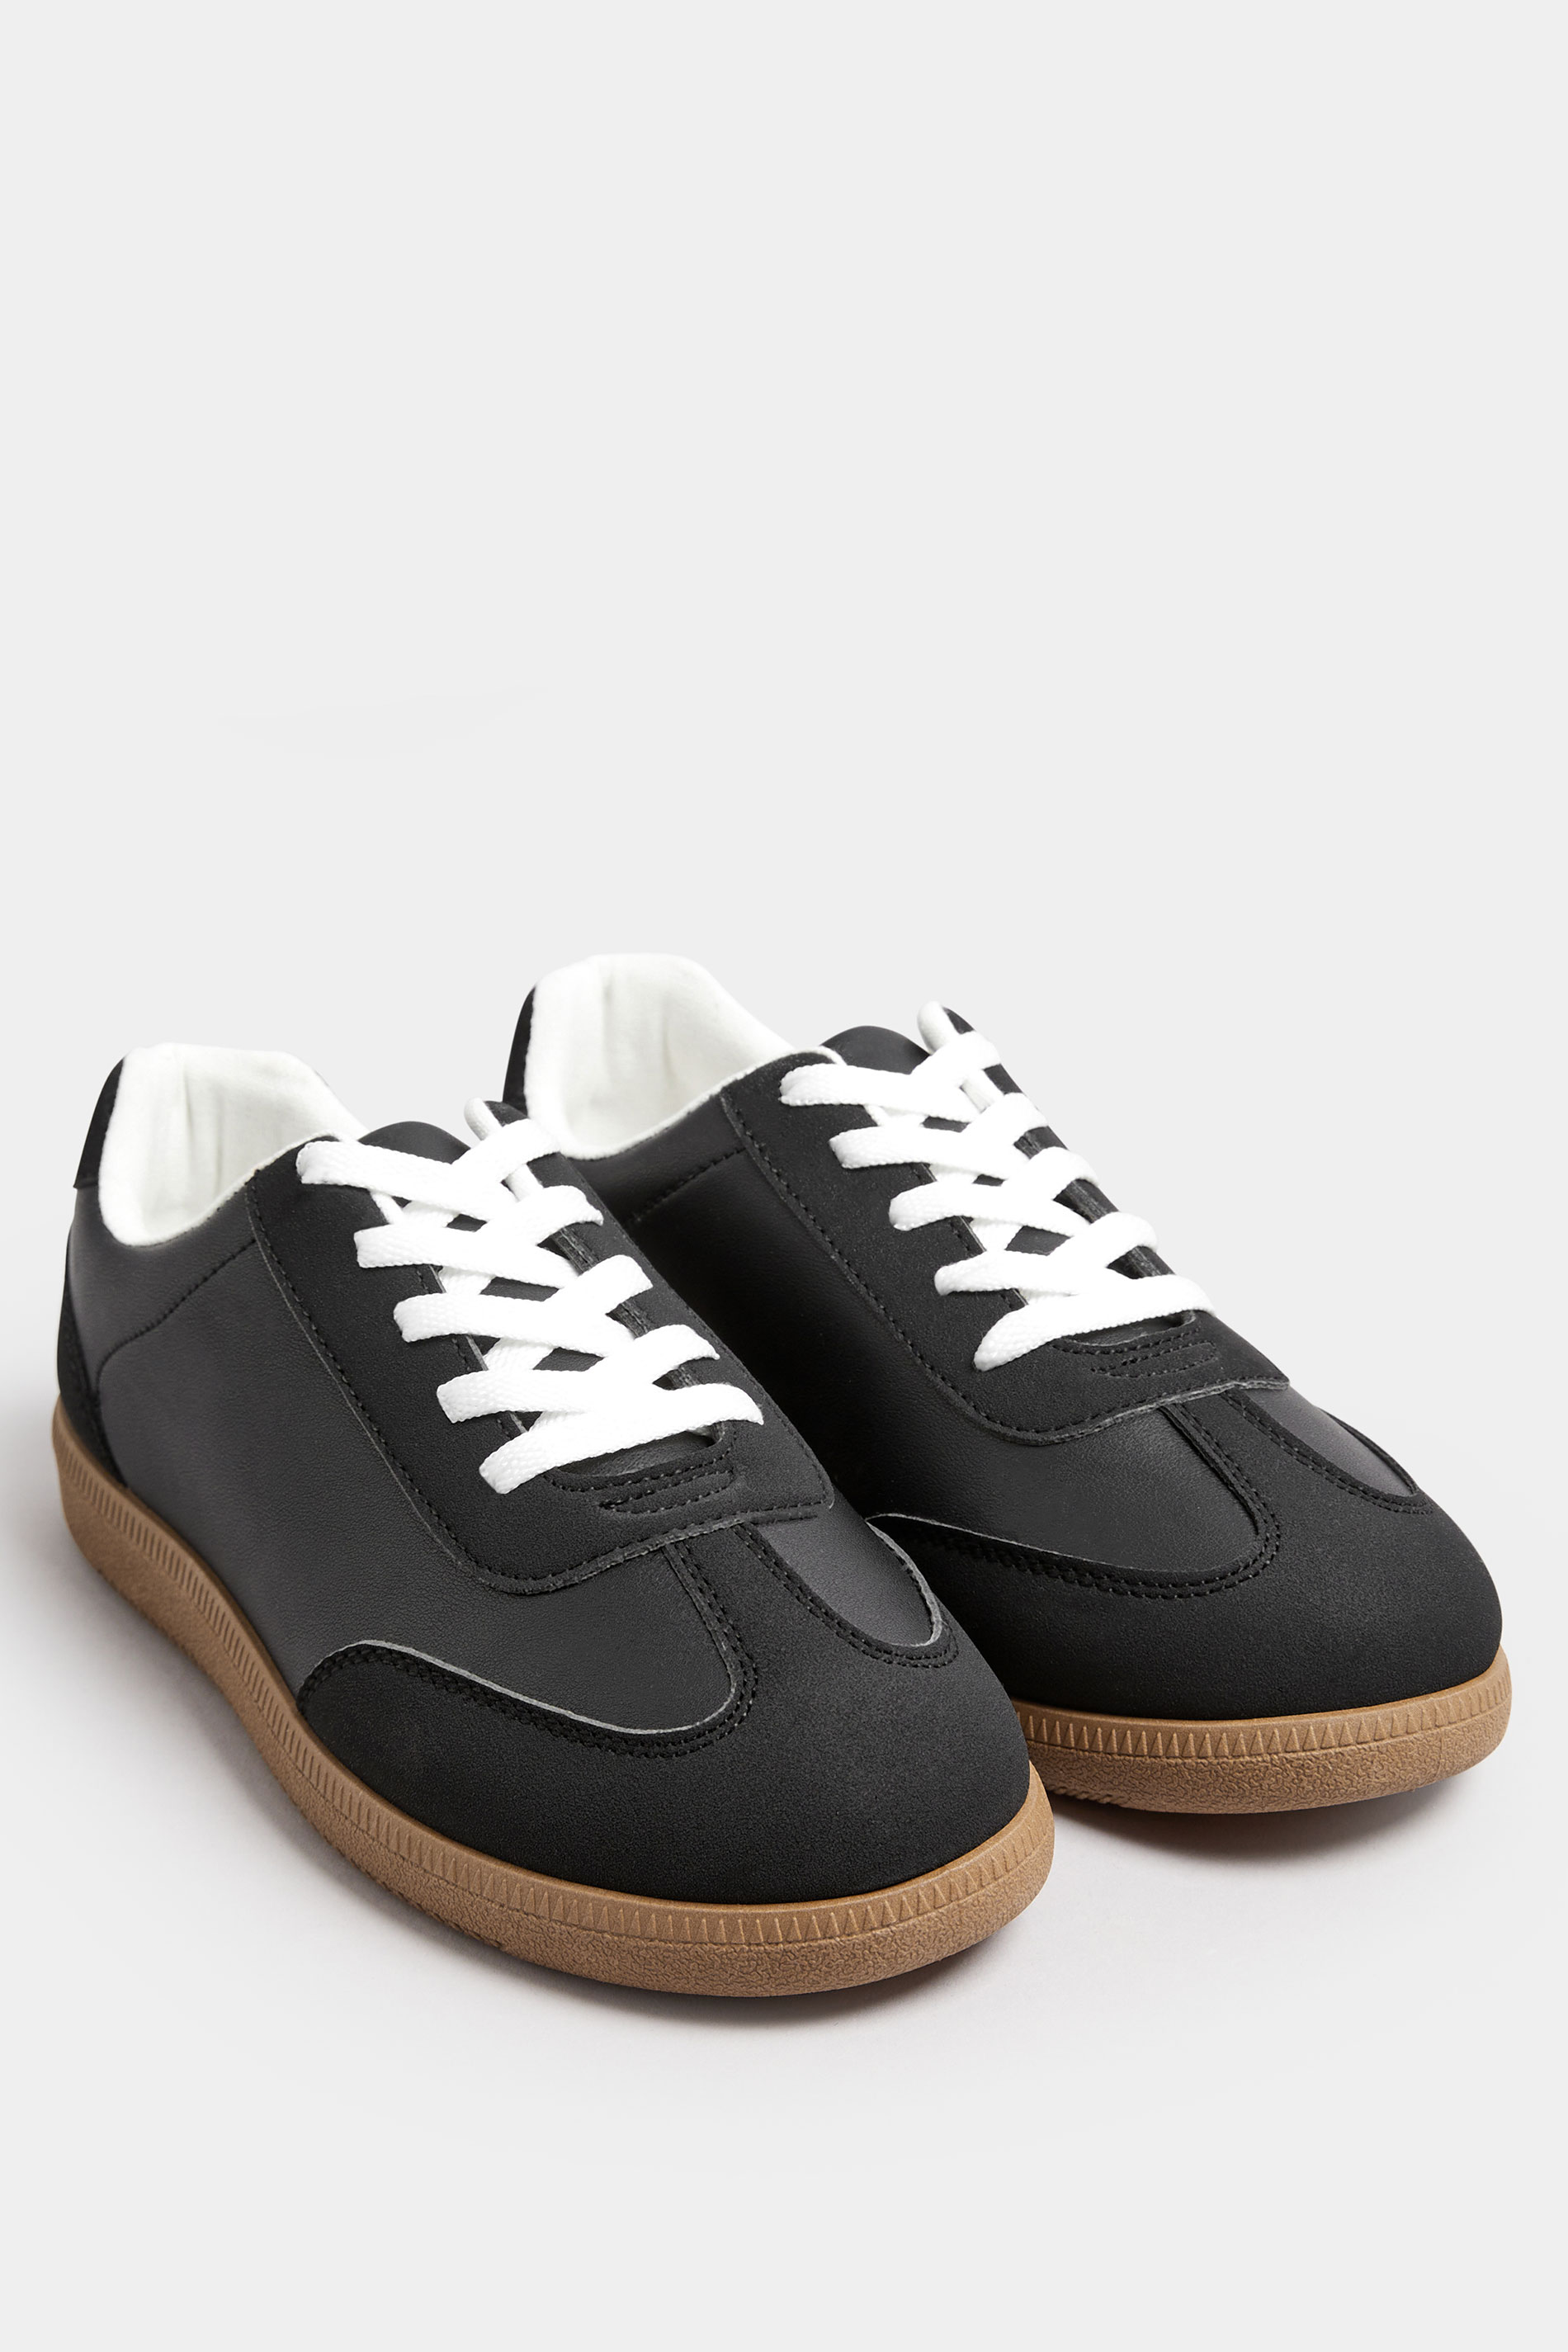 Black Retro Gum Sole Trainers In Extra Wide EEE Fit | Yours Clothing 2